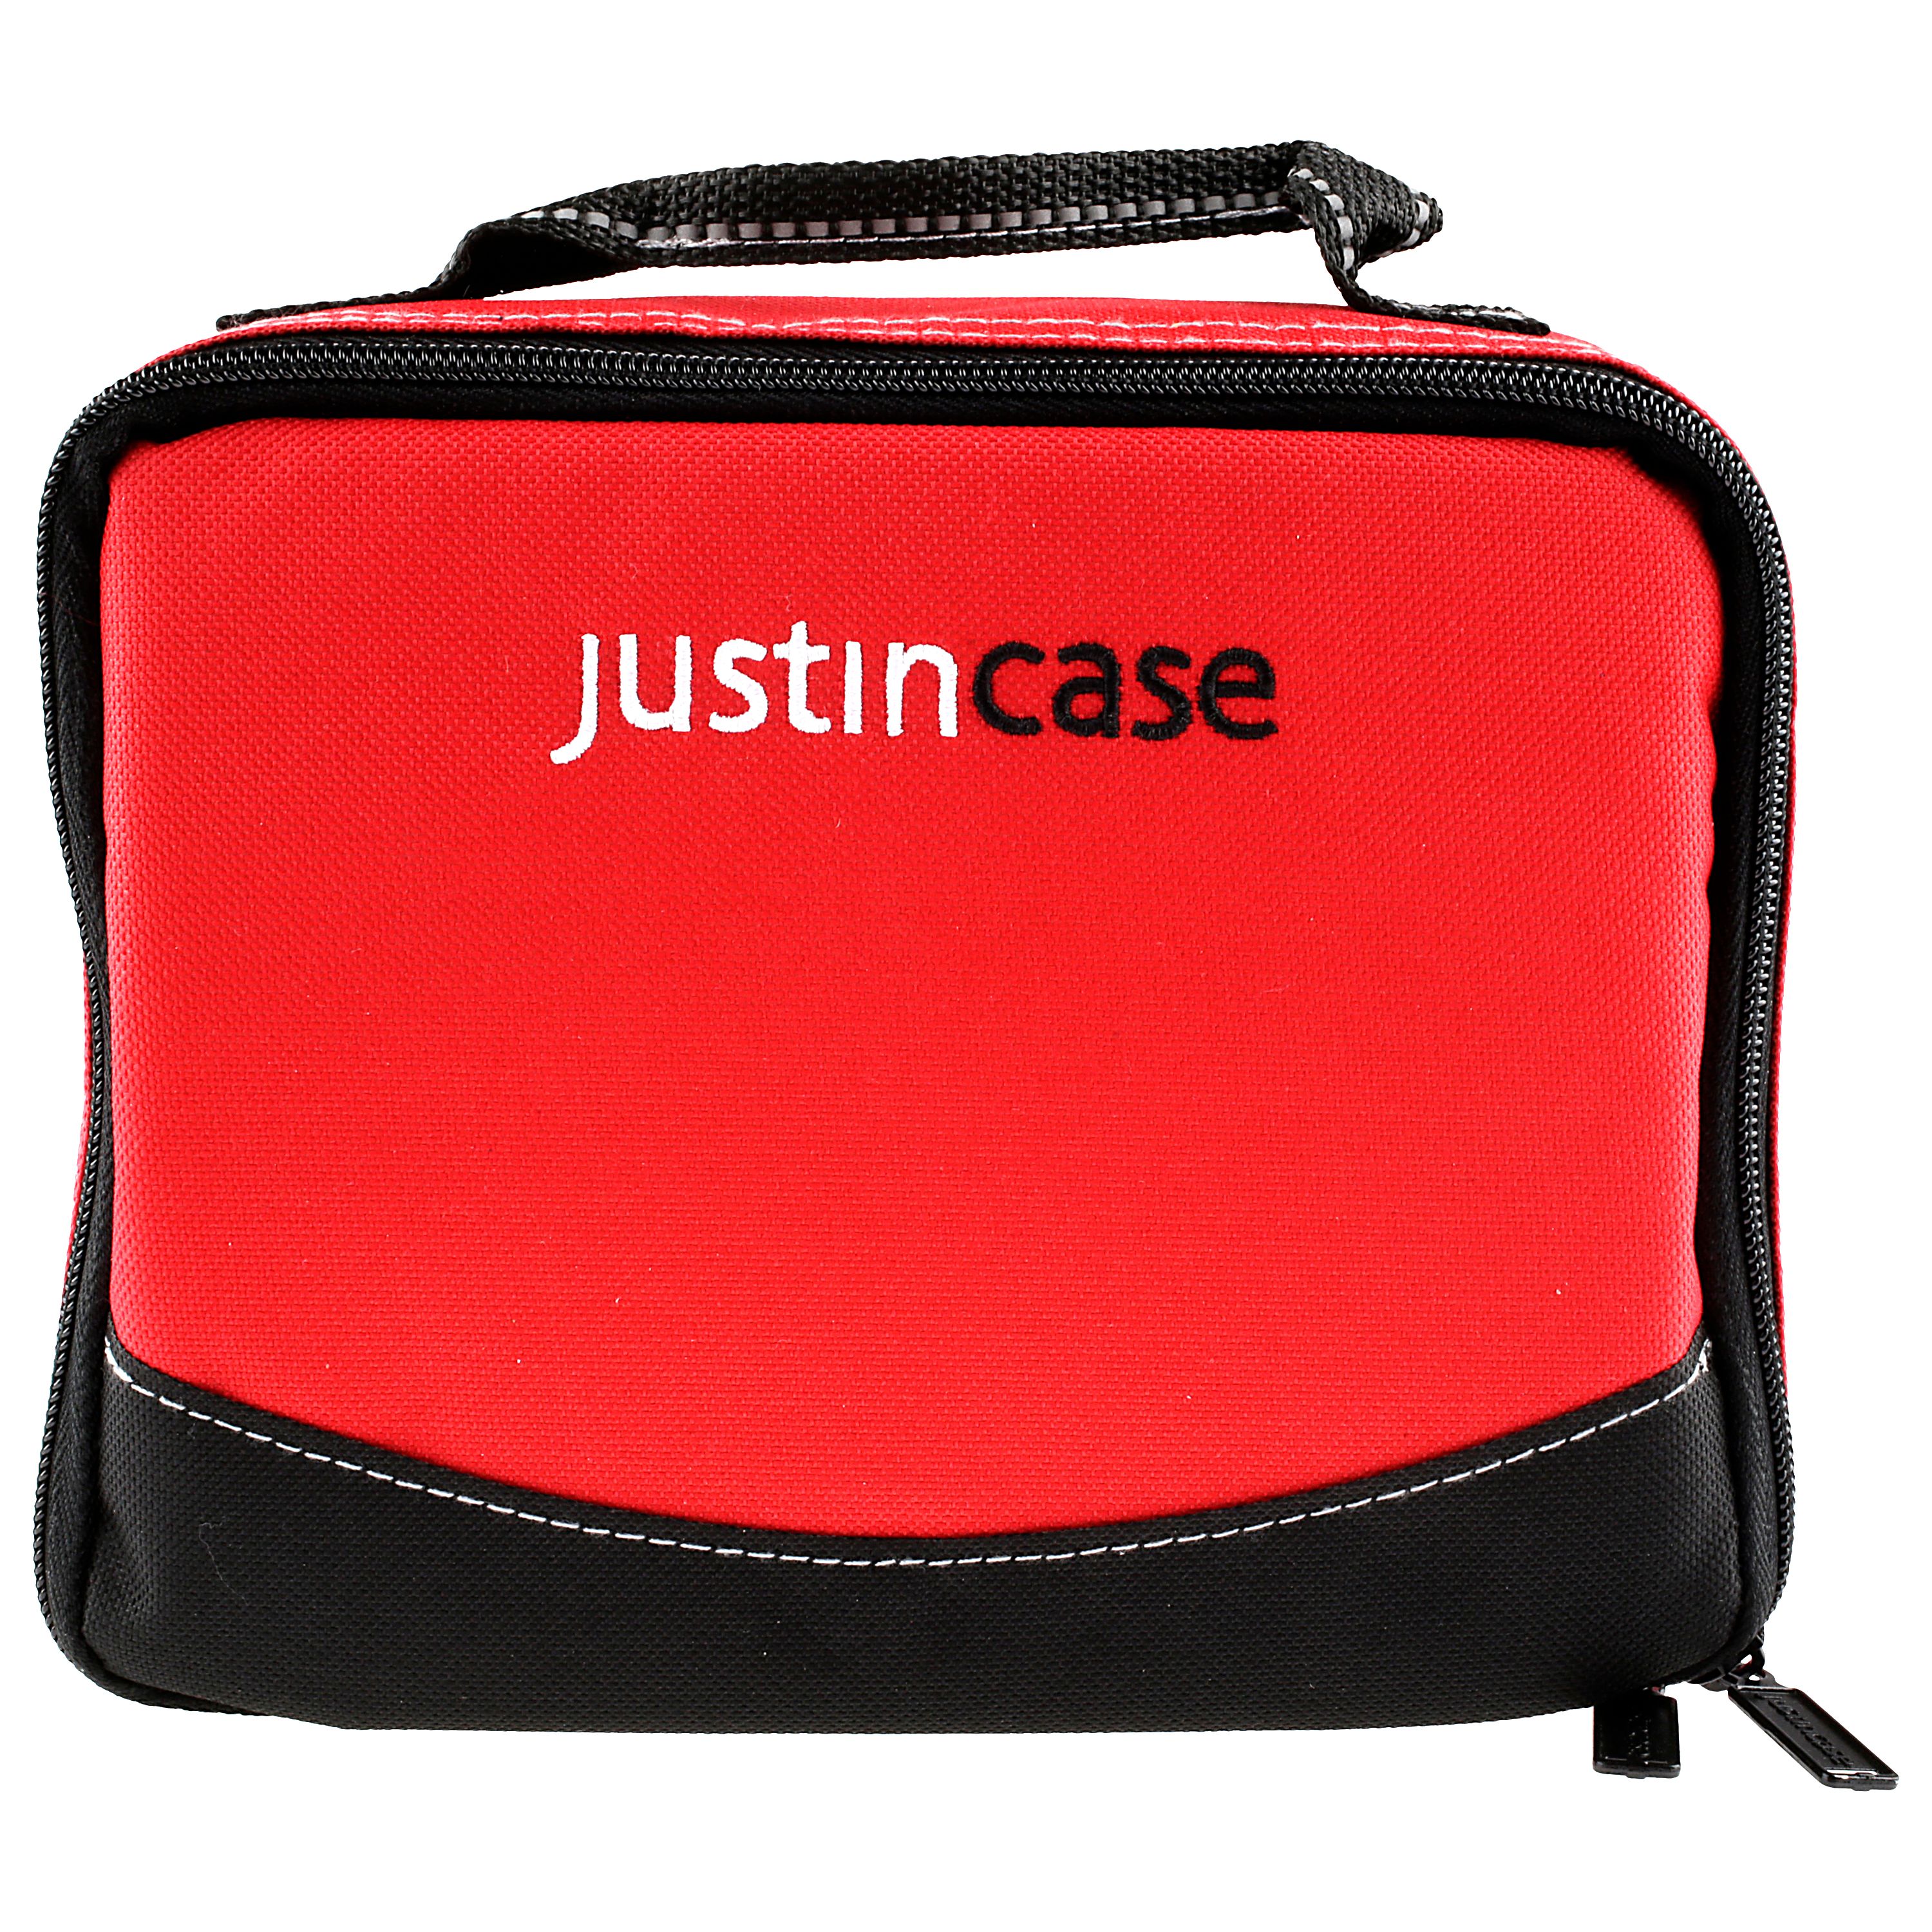 Justin Case Family First Aid Kit - image 2 of 5